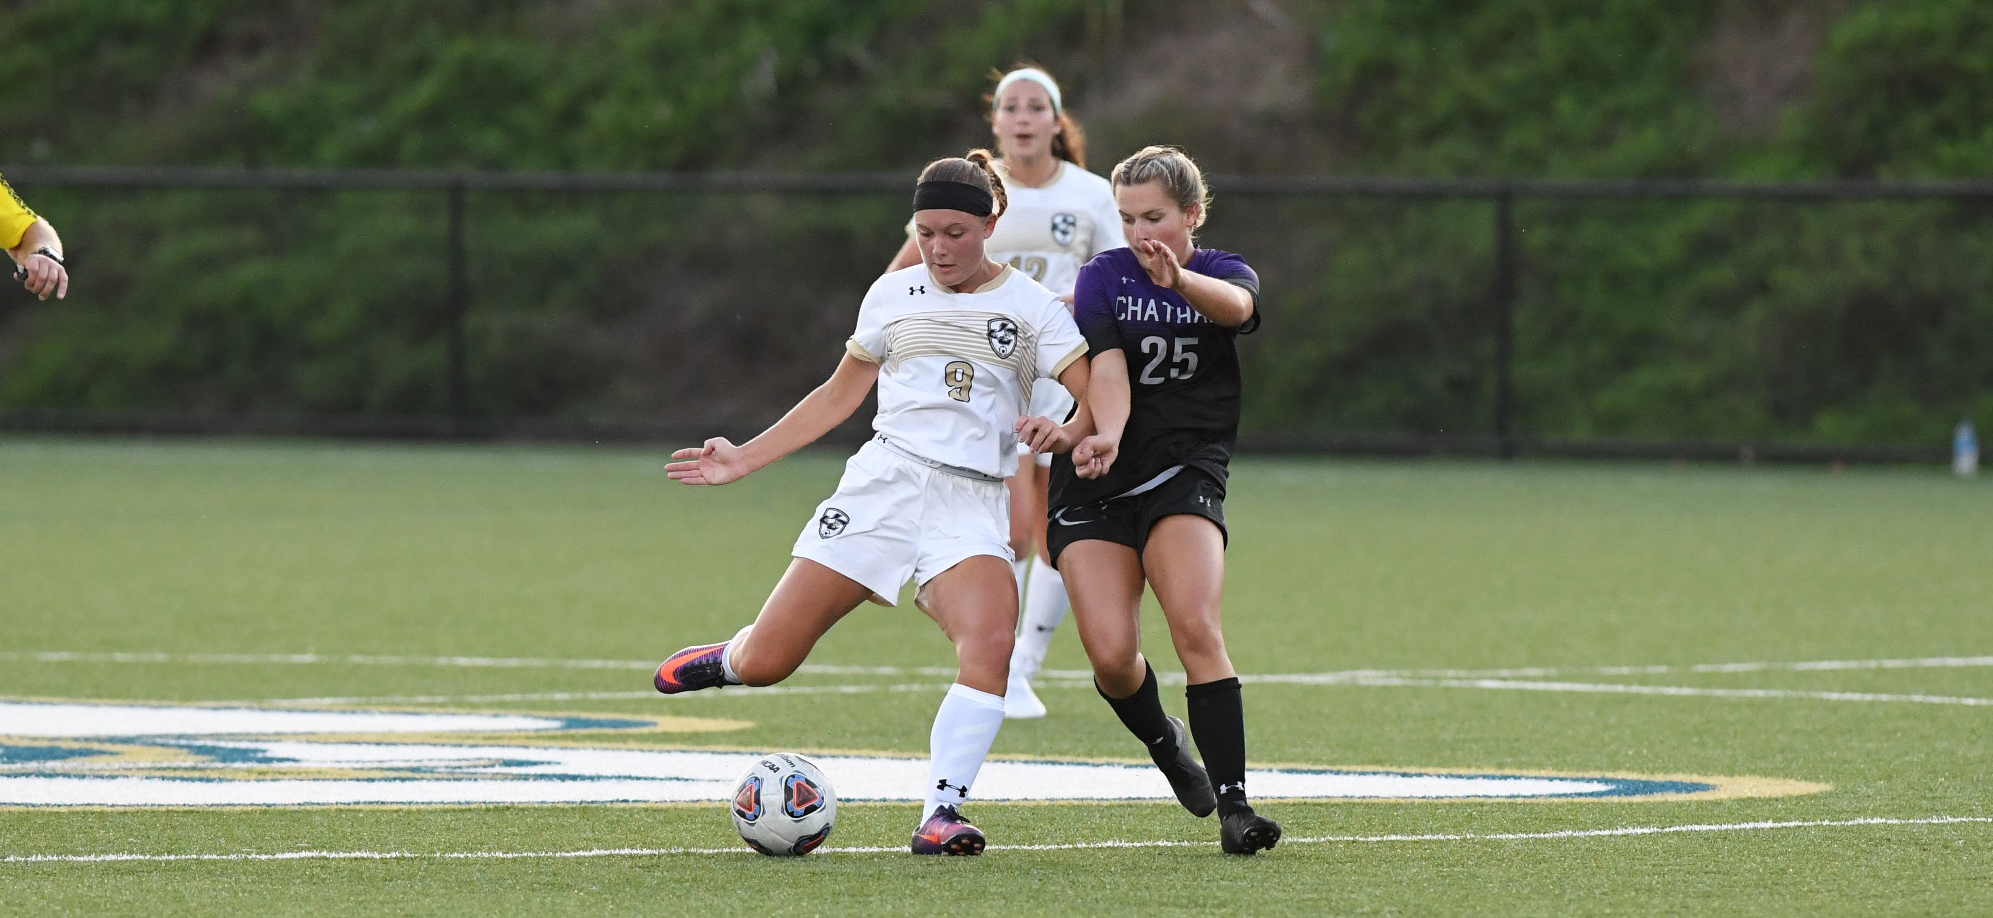 Brooke Emge netted a goal and took two shots as the Eagles drew, 1-1 against Chatham.